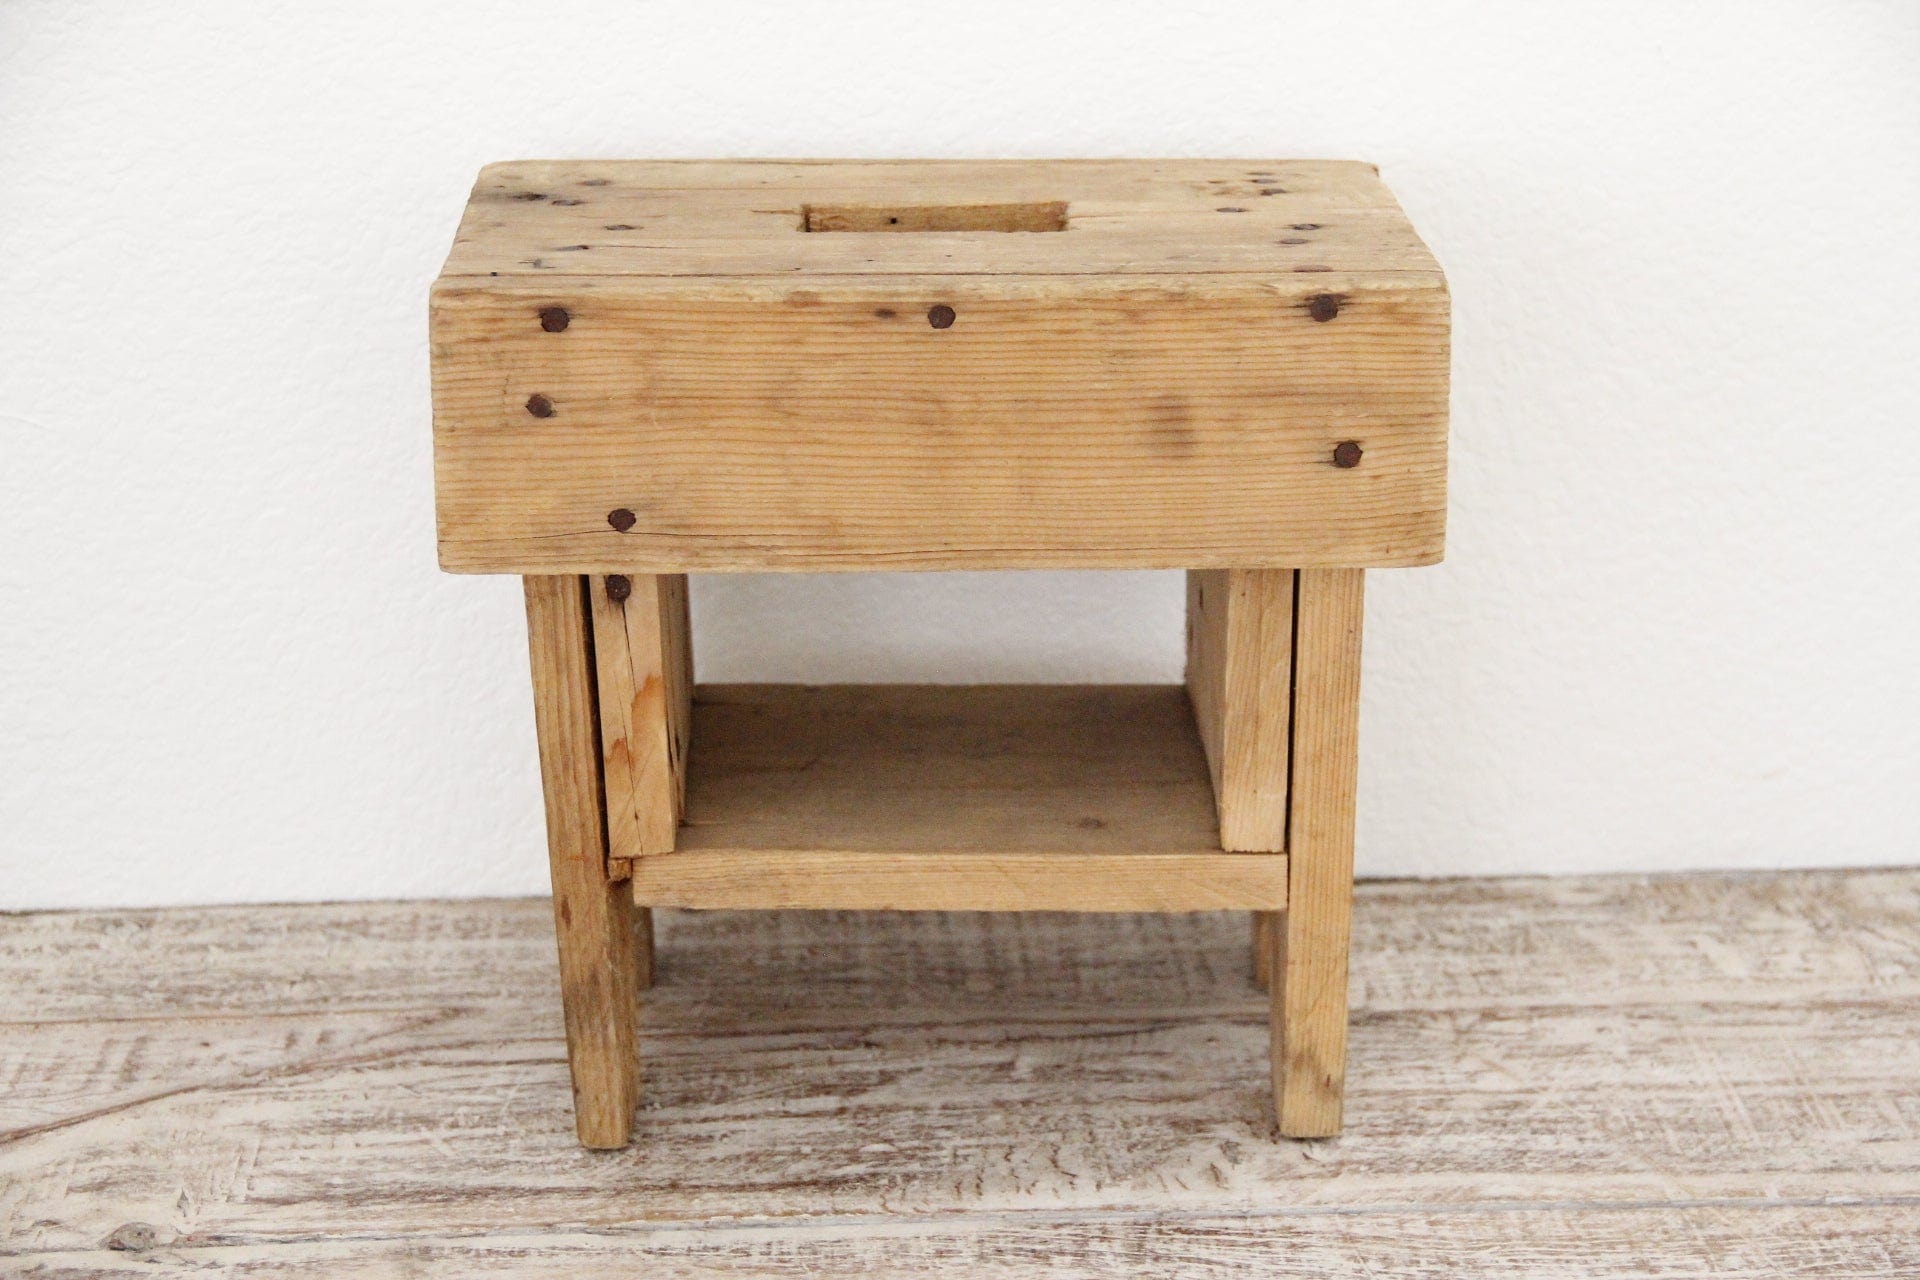 Antique Wood Step Stool top | Hand-Made Primitive furniture